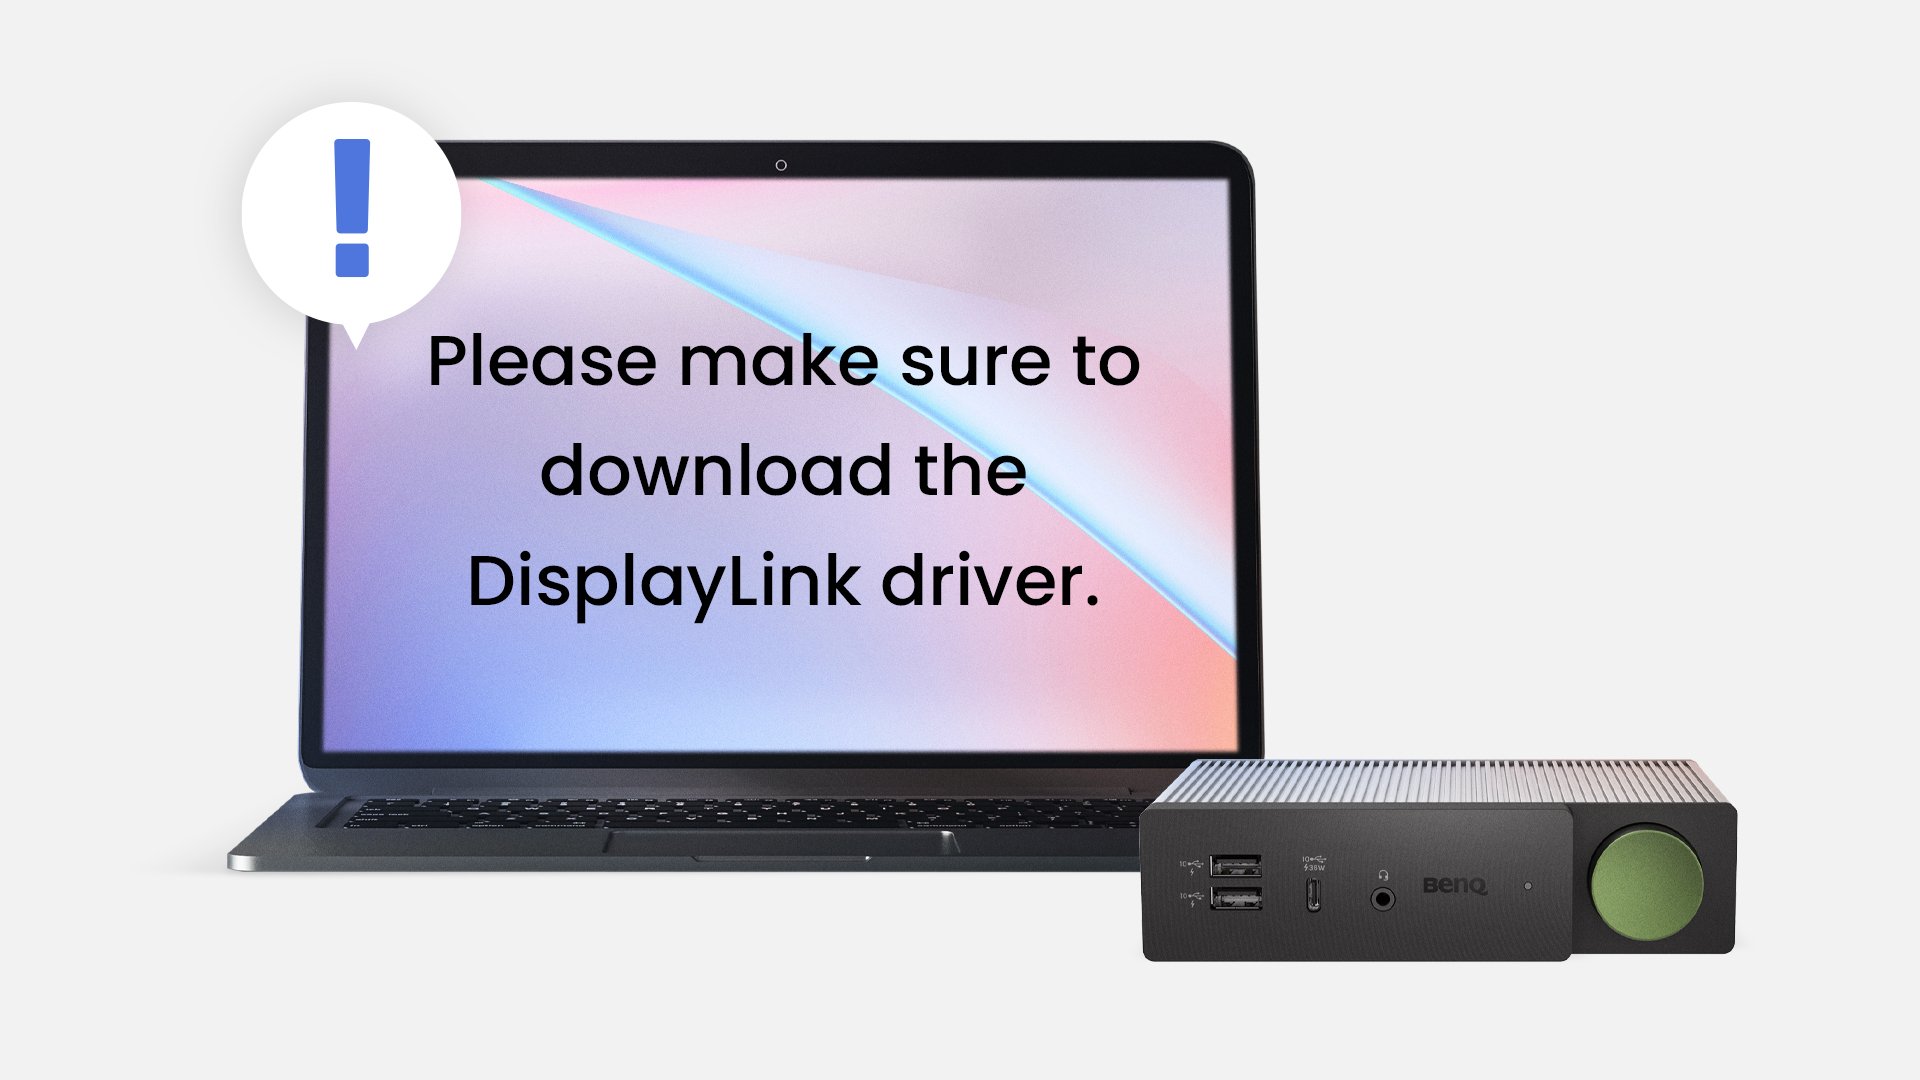 benq dock dp1310 becreatus supports displaylink but does not support hdcp and make sure to dowload the displaylink driver